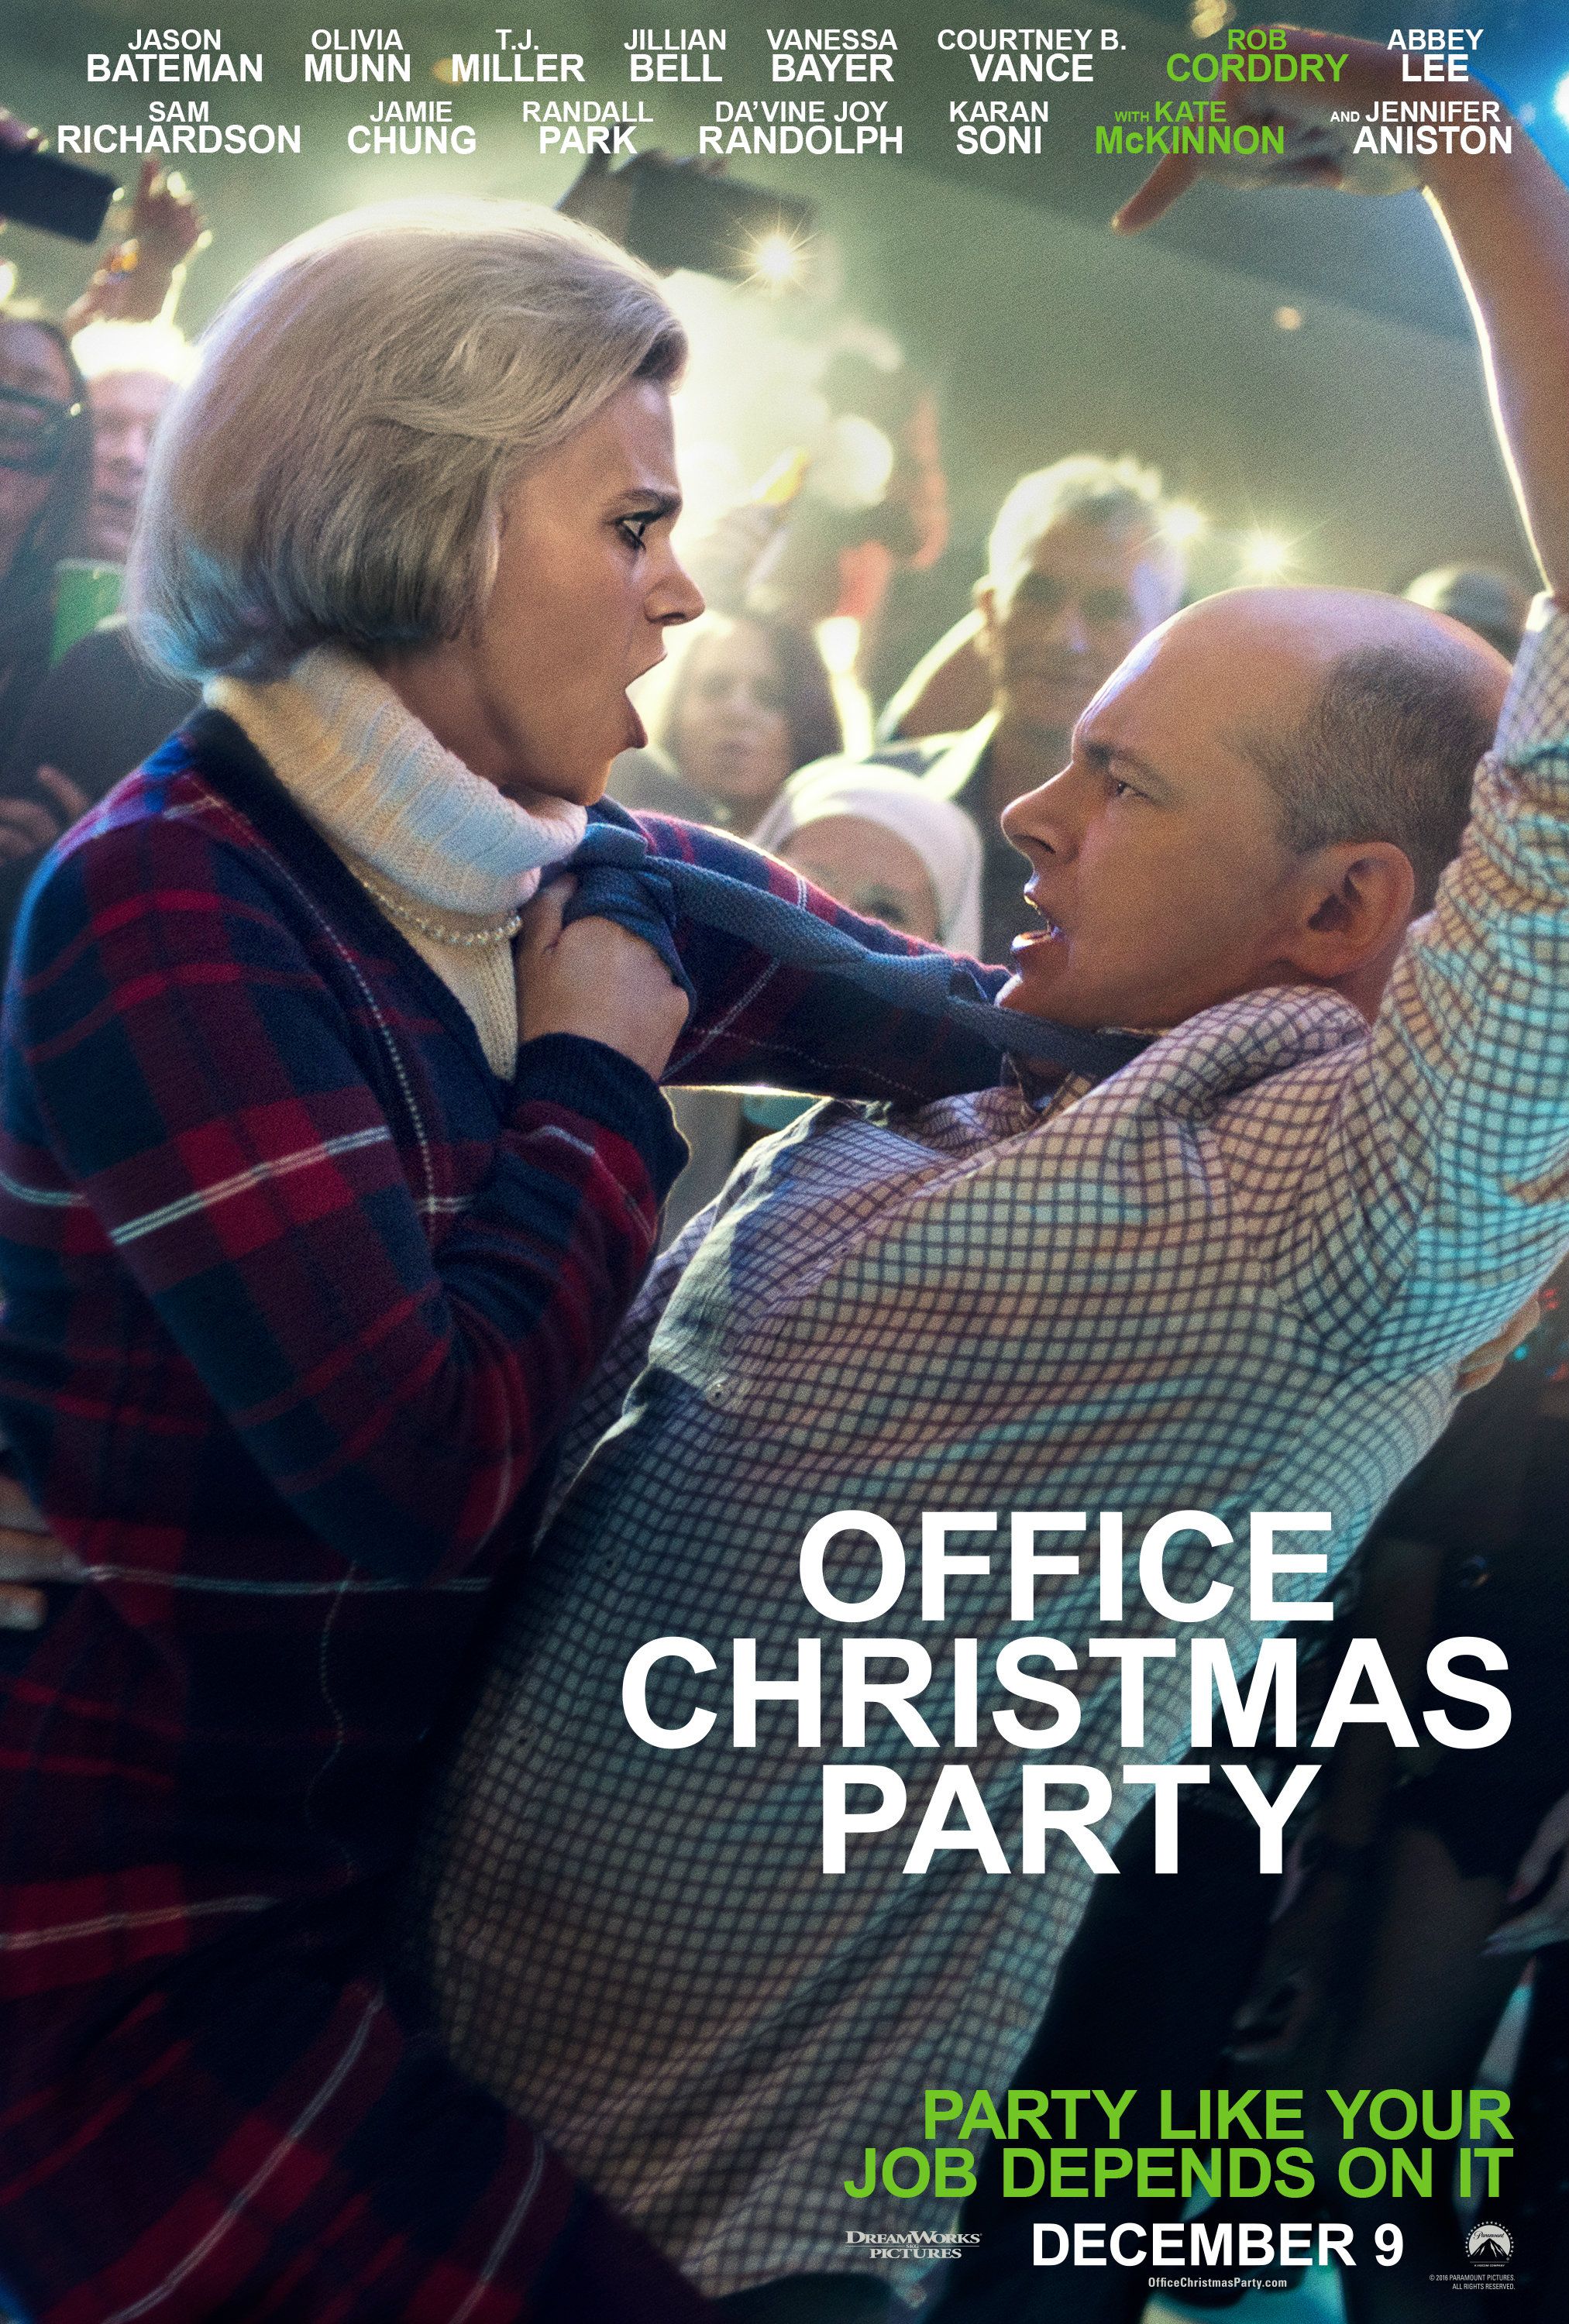 Office Christmas Party Poster -Kate McKinnon